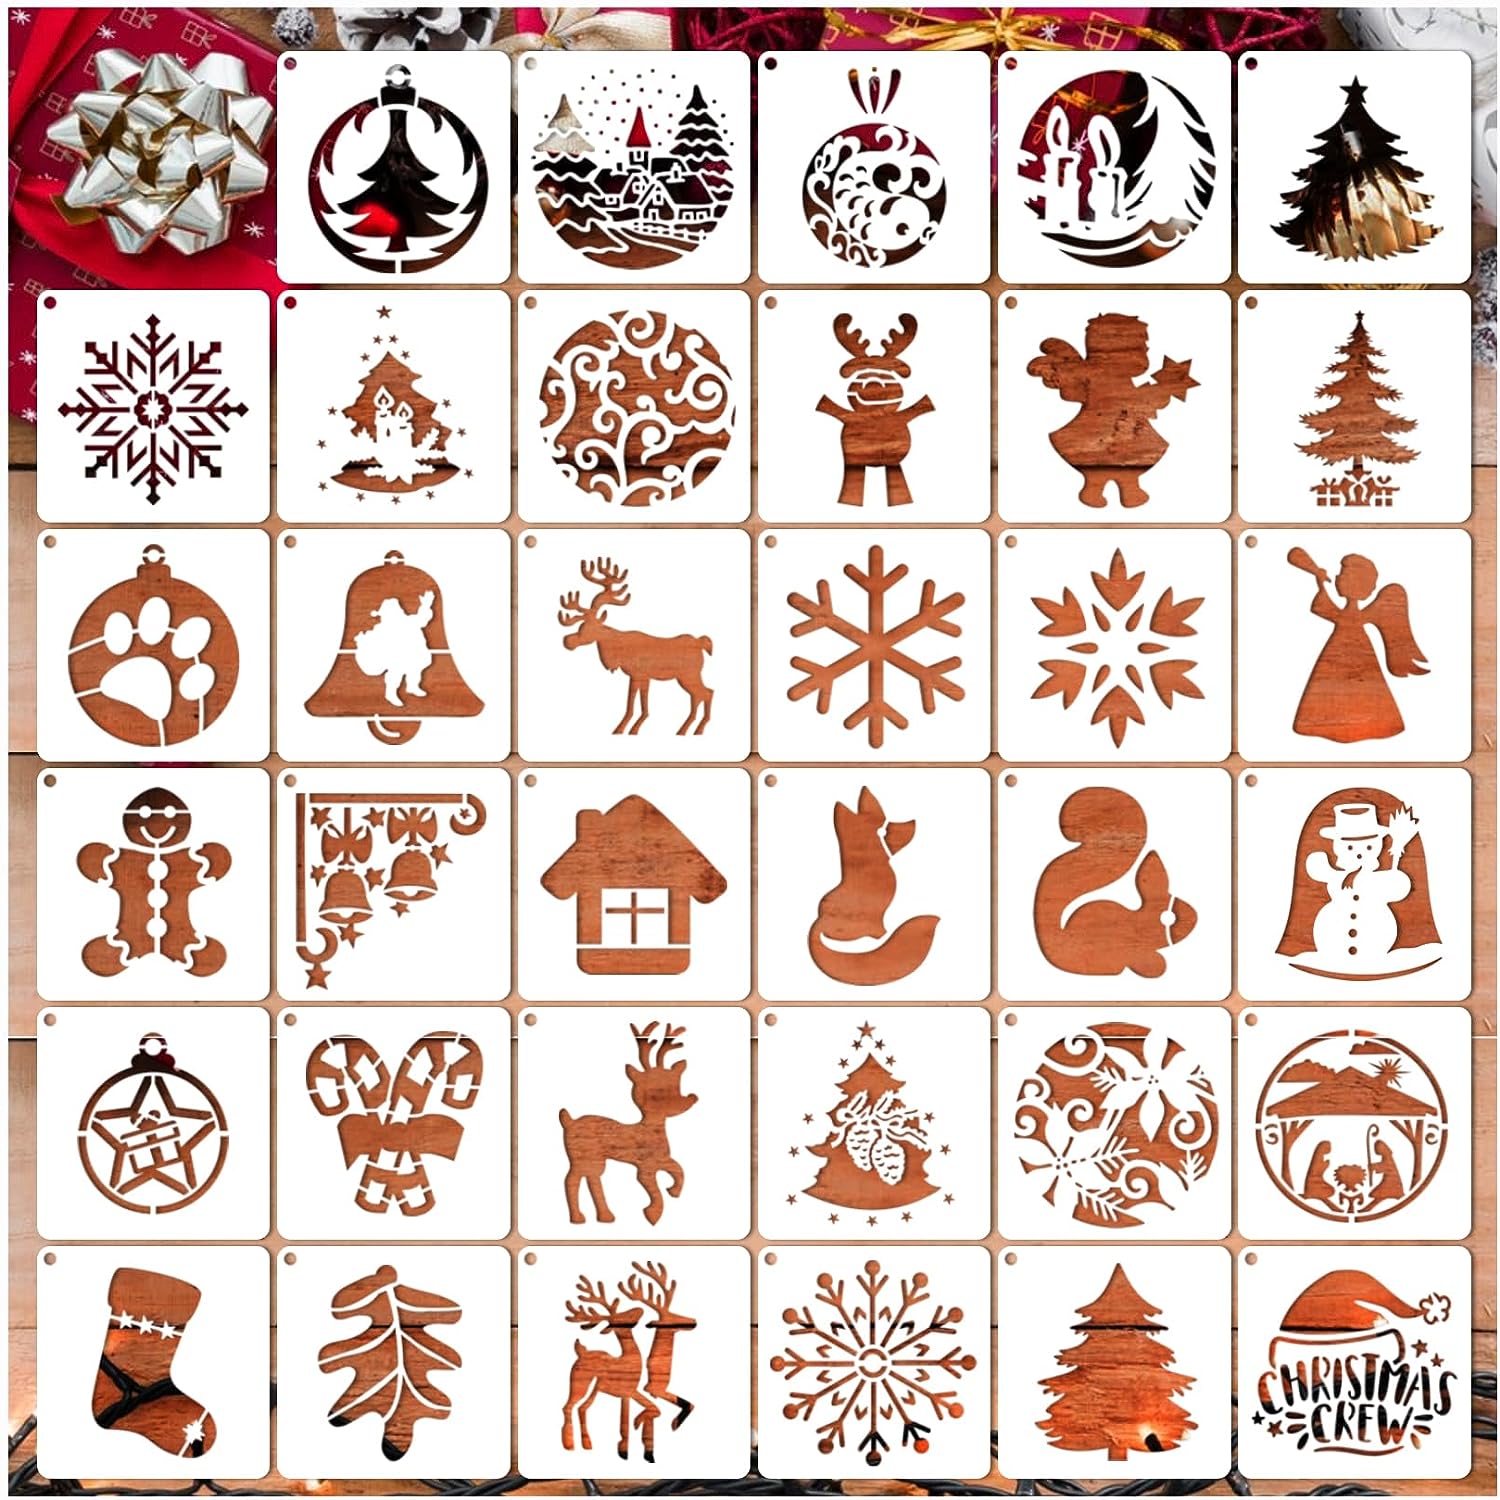 Losarin Christmas Stencils for Painting on Wood,8 x 8 inch Reusable Merry Christmas Stencil Crafts for Christmas Signs,Including Snowflake/Christmas